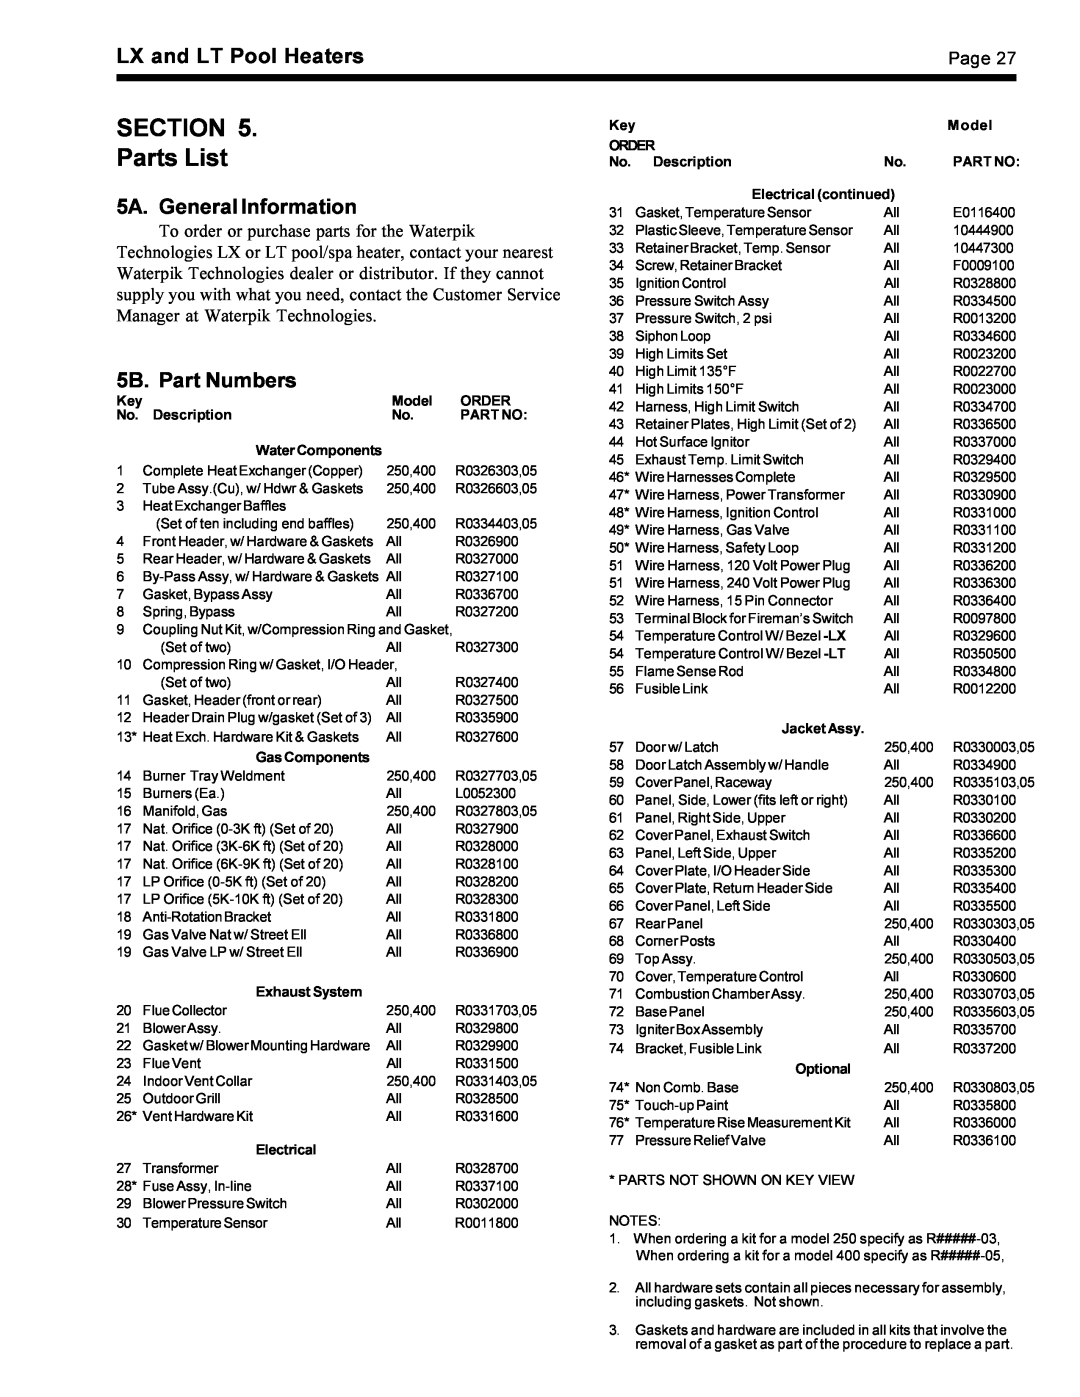 Waterpik Technologies pool/spa heater warranty SECTION Parts List, 5A. General Information, 5B. Part Numbers 